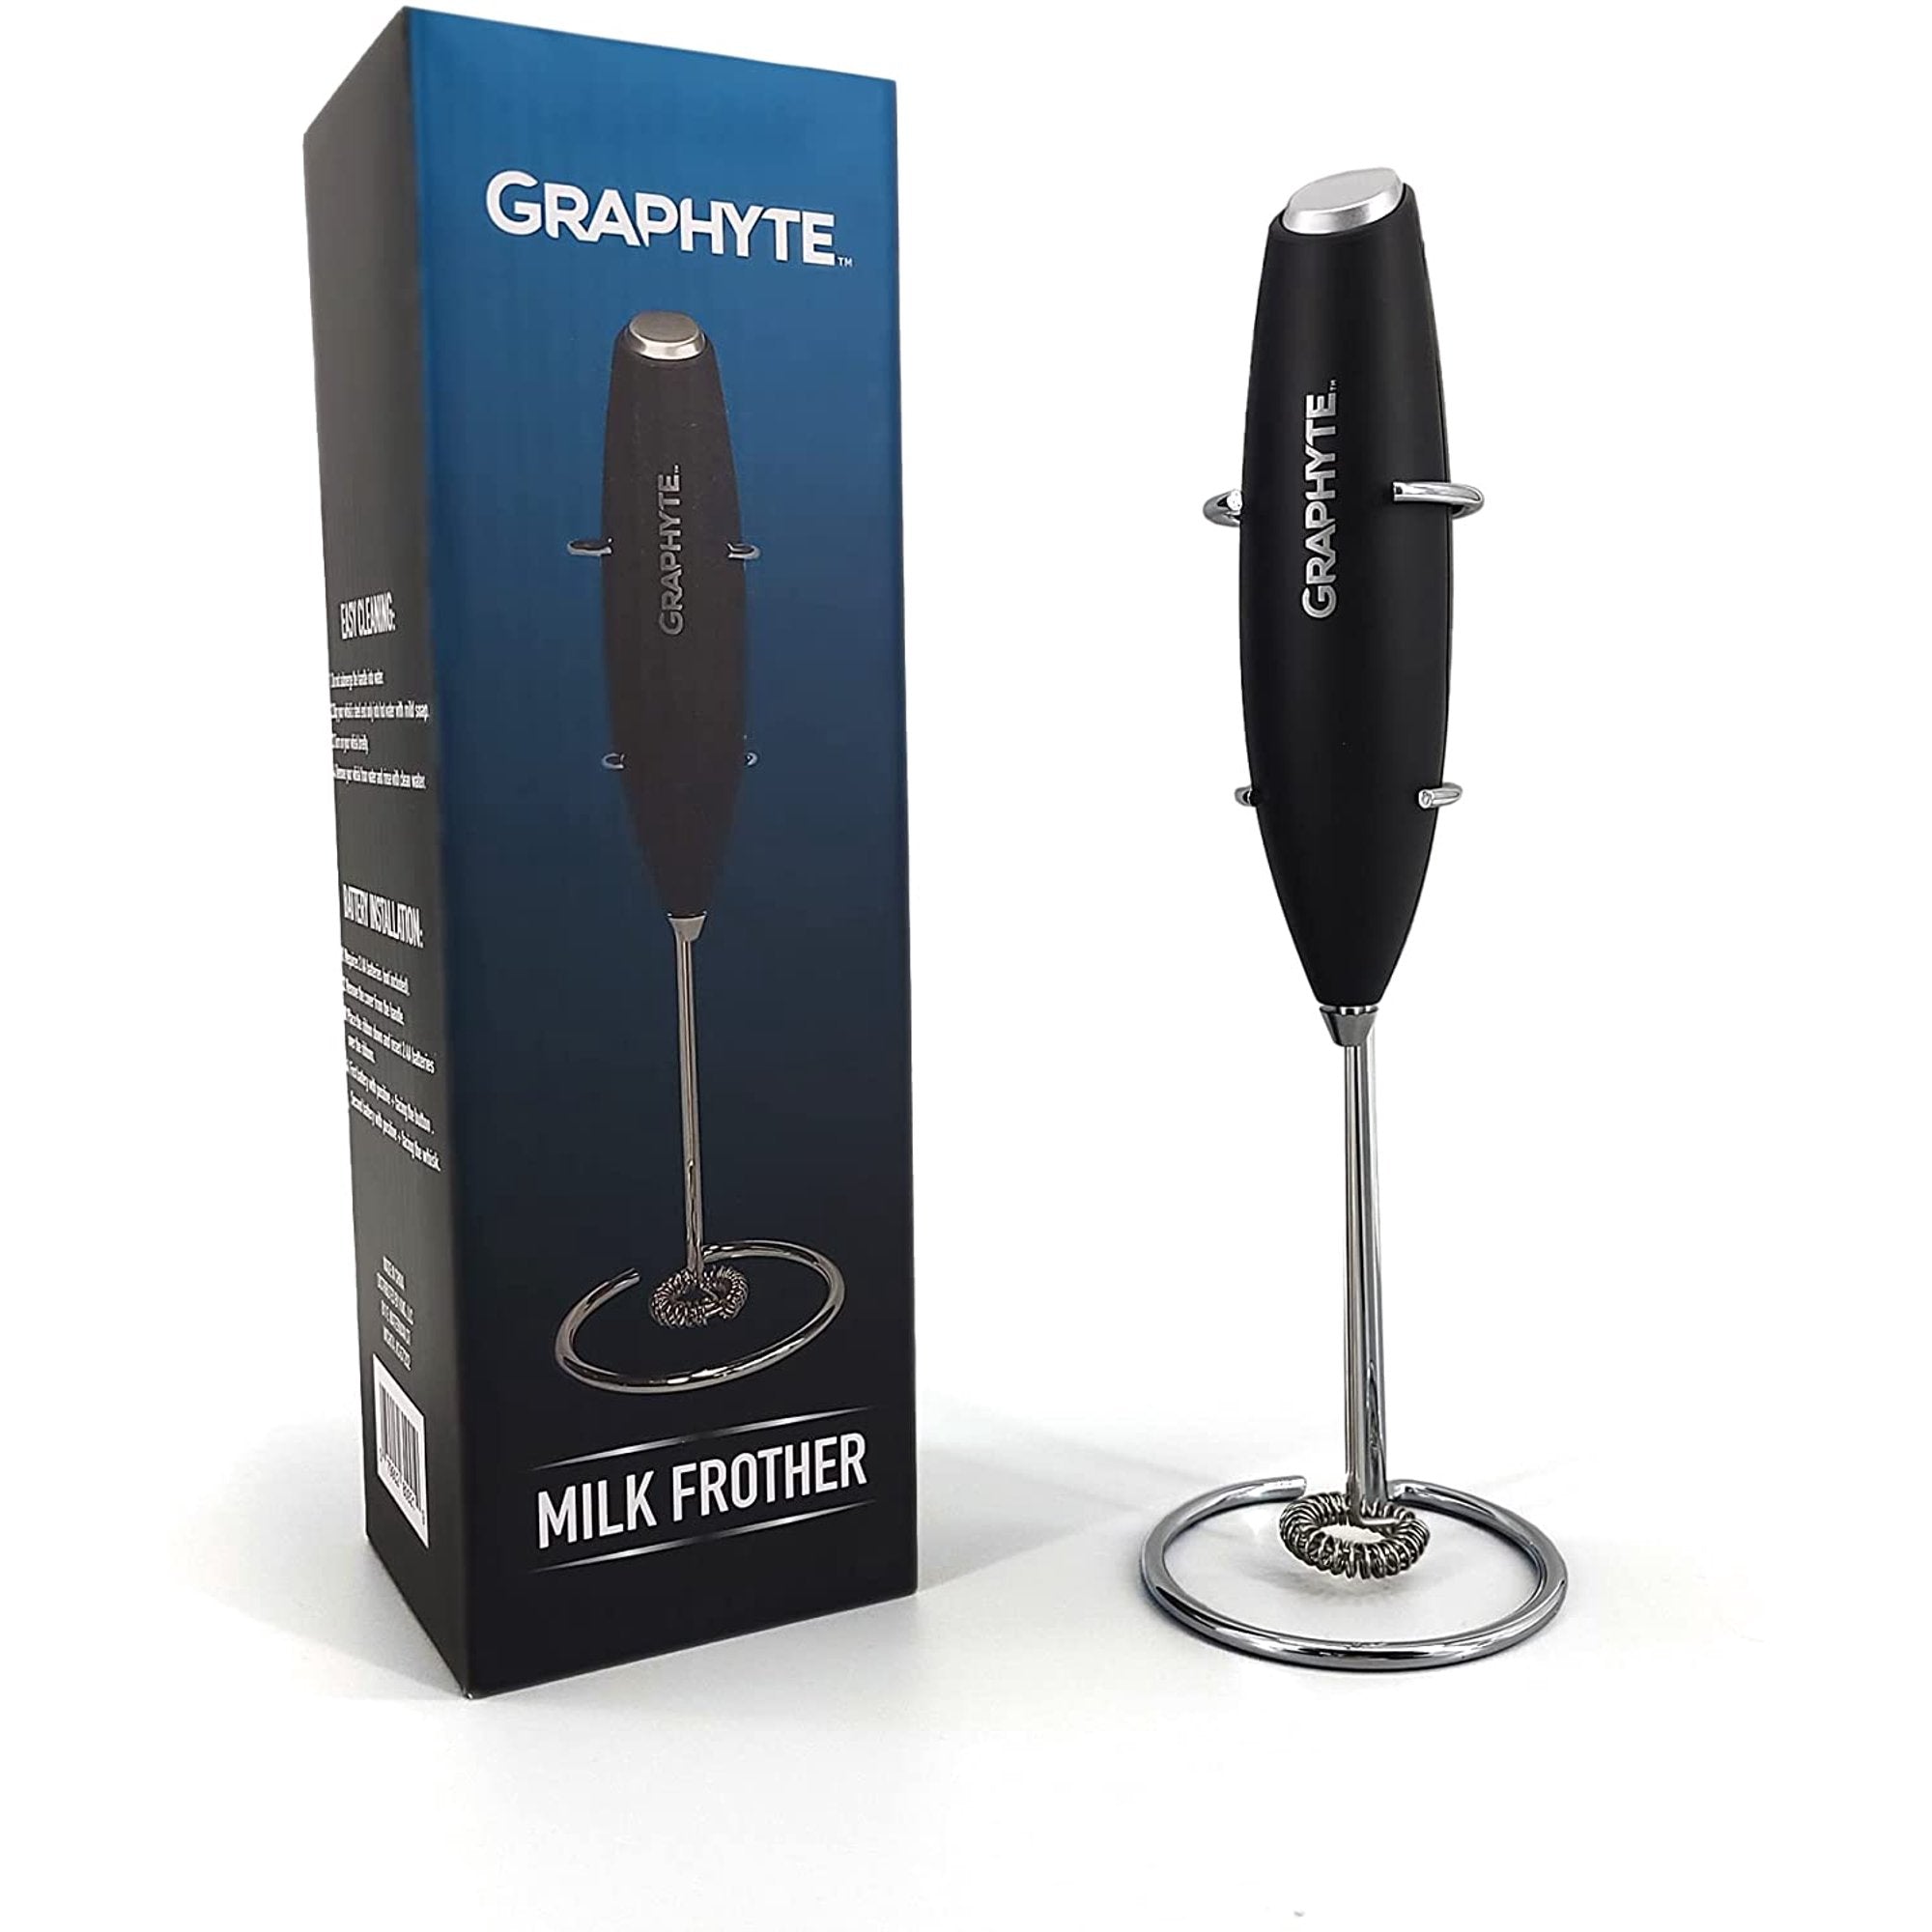 Image of Graphyte Handheld Milk Frother for Lattes, Coffee & More